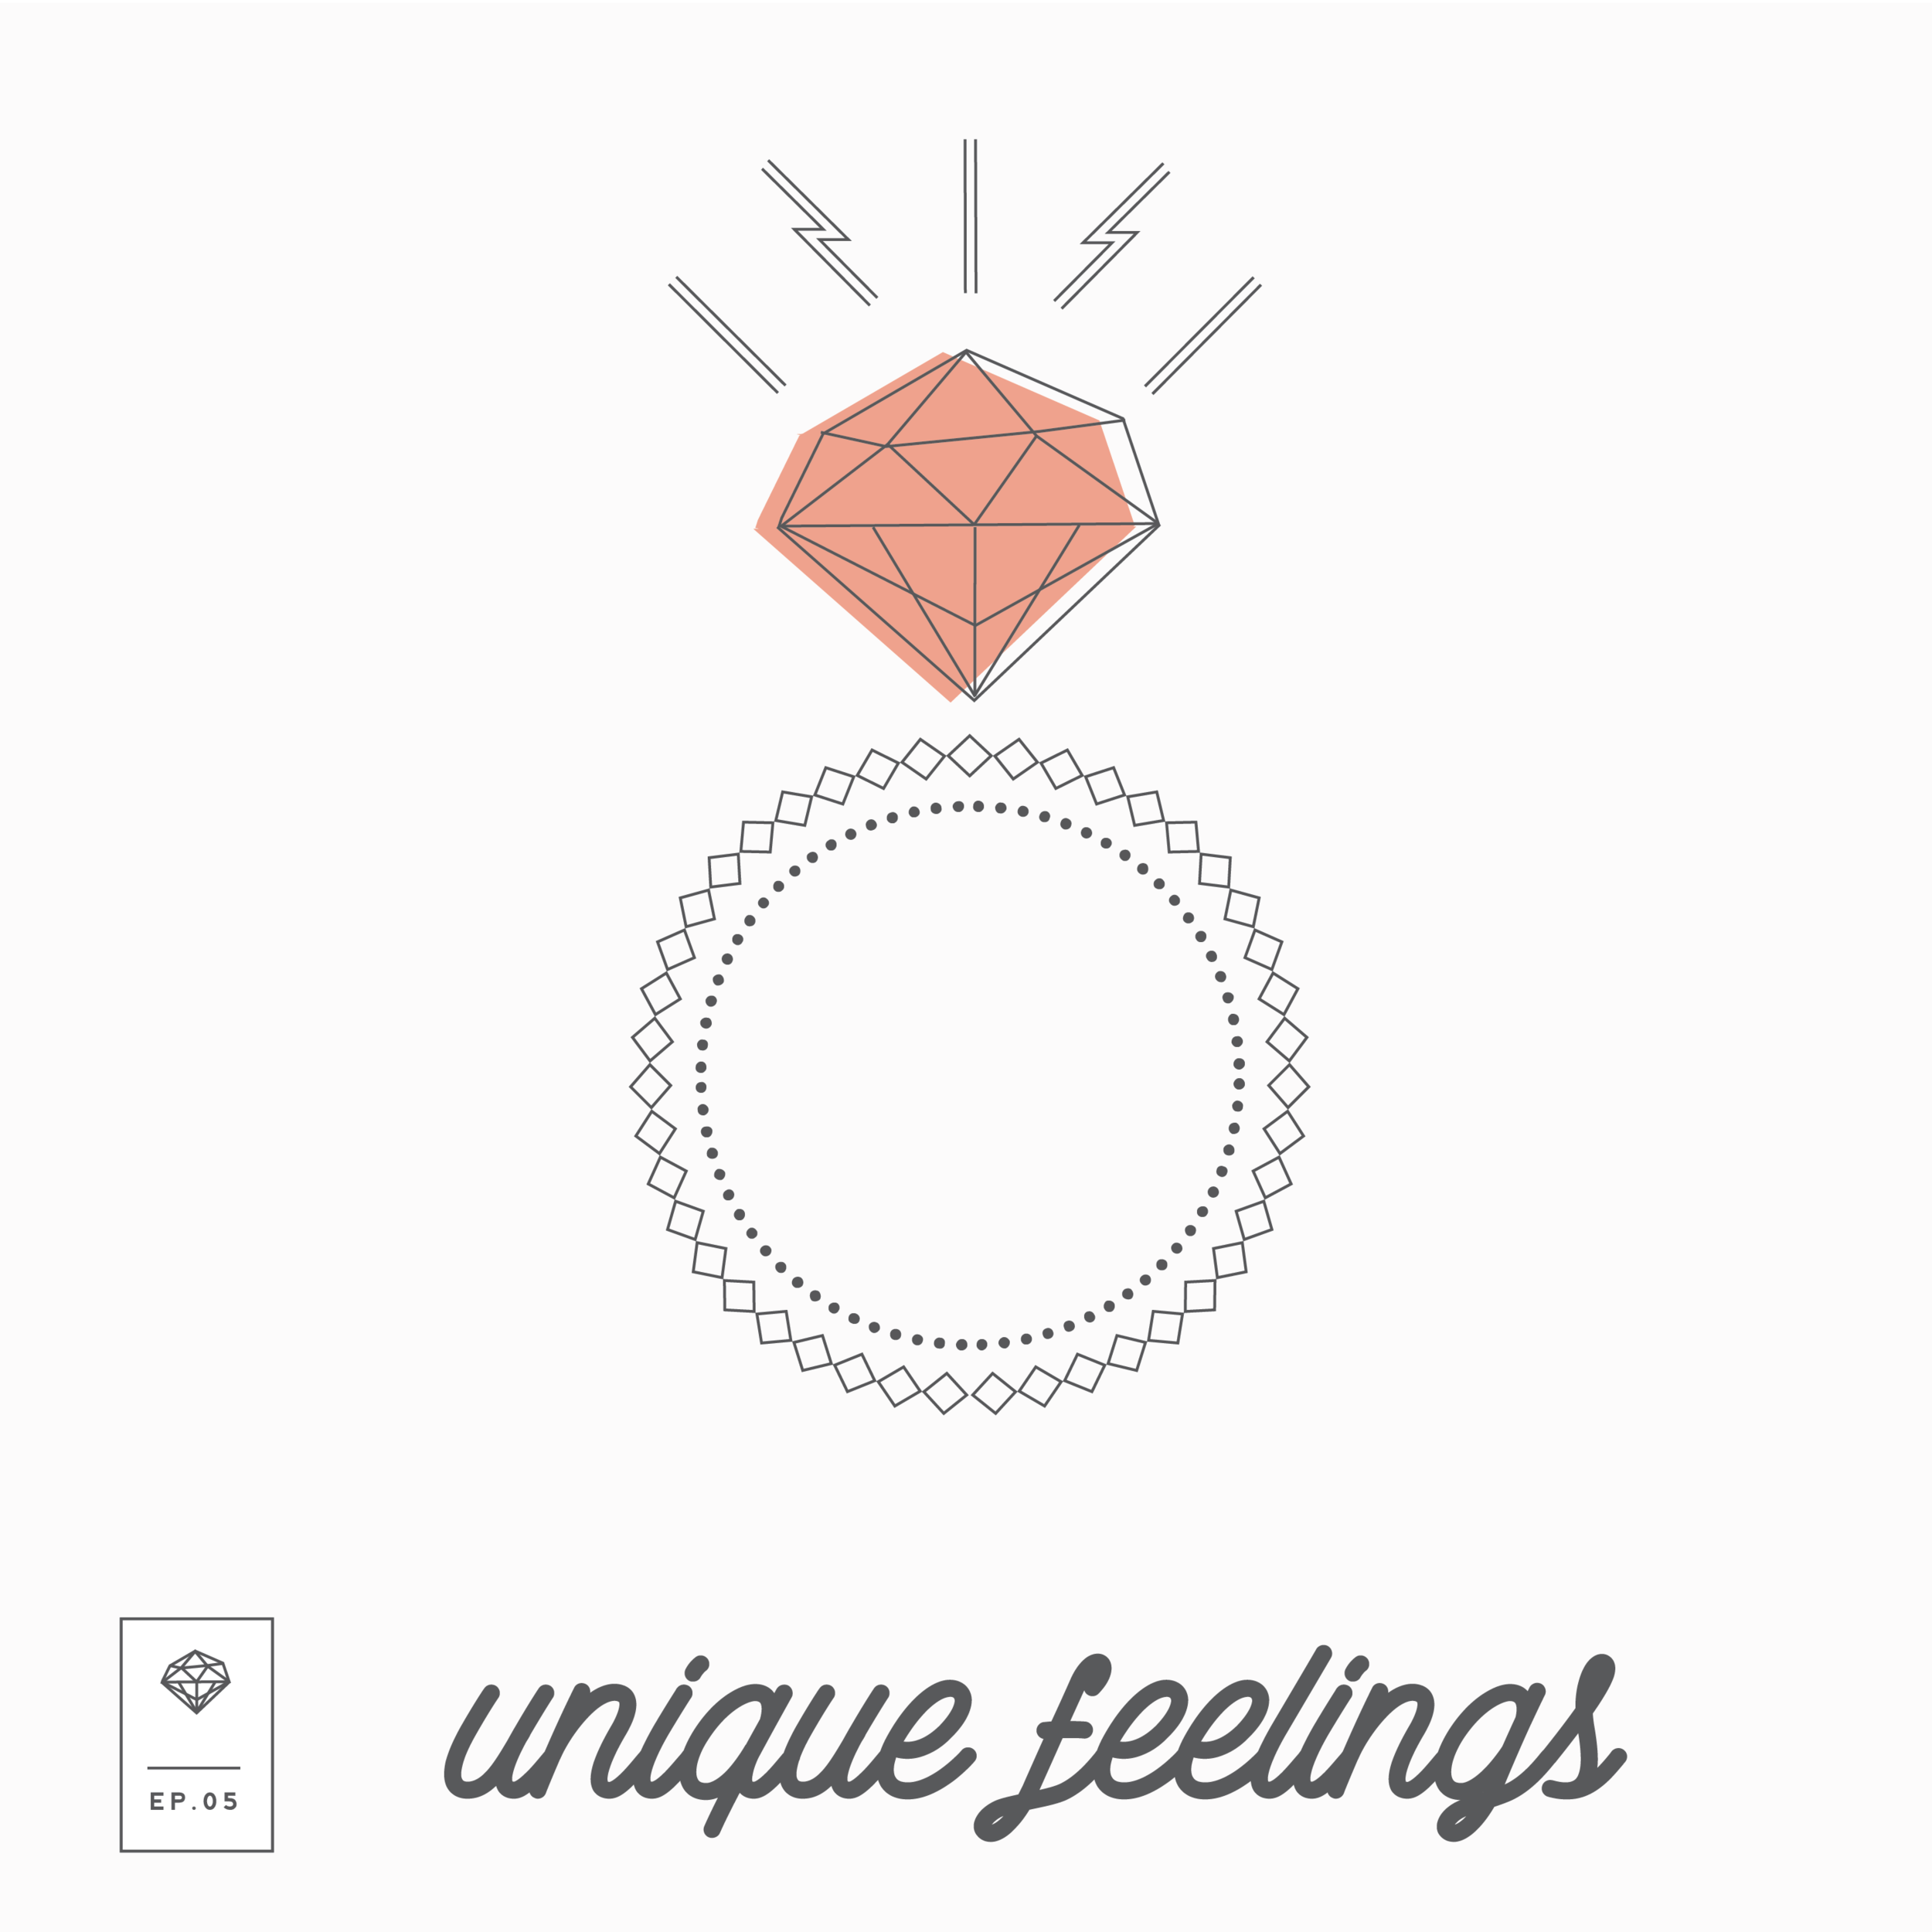 Engaged Episode Covers 02-unique feelings-01.png